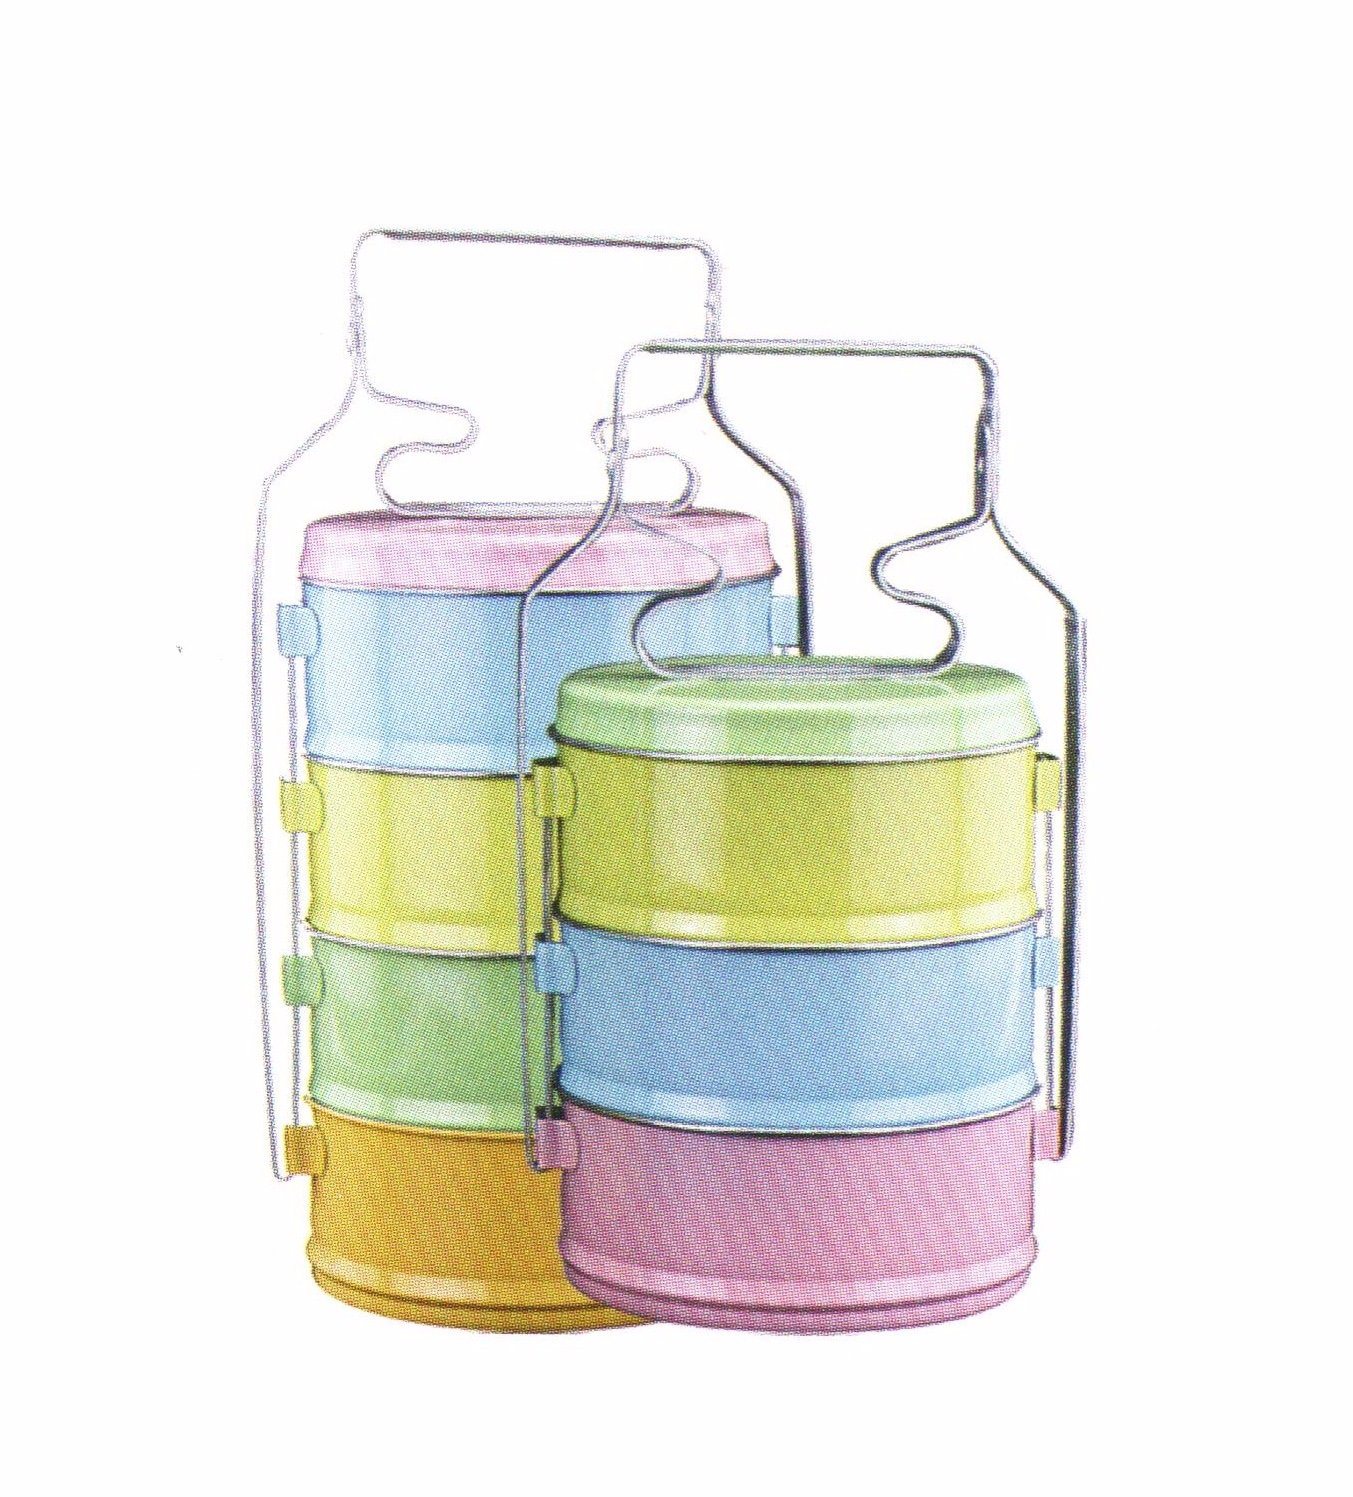 New Arrival China Blender -
 3-4 Layers Stainless Steel Lunch Box Food Carrier Lb004 – Long Prosper